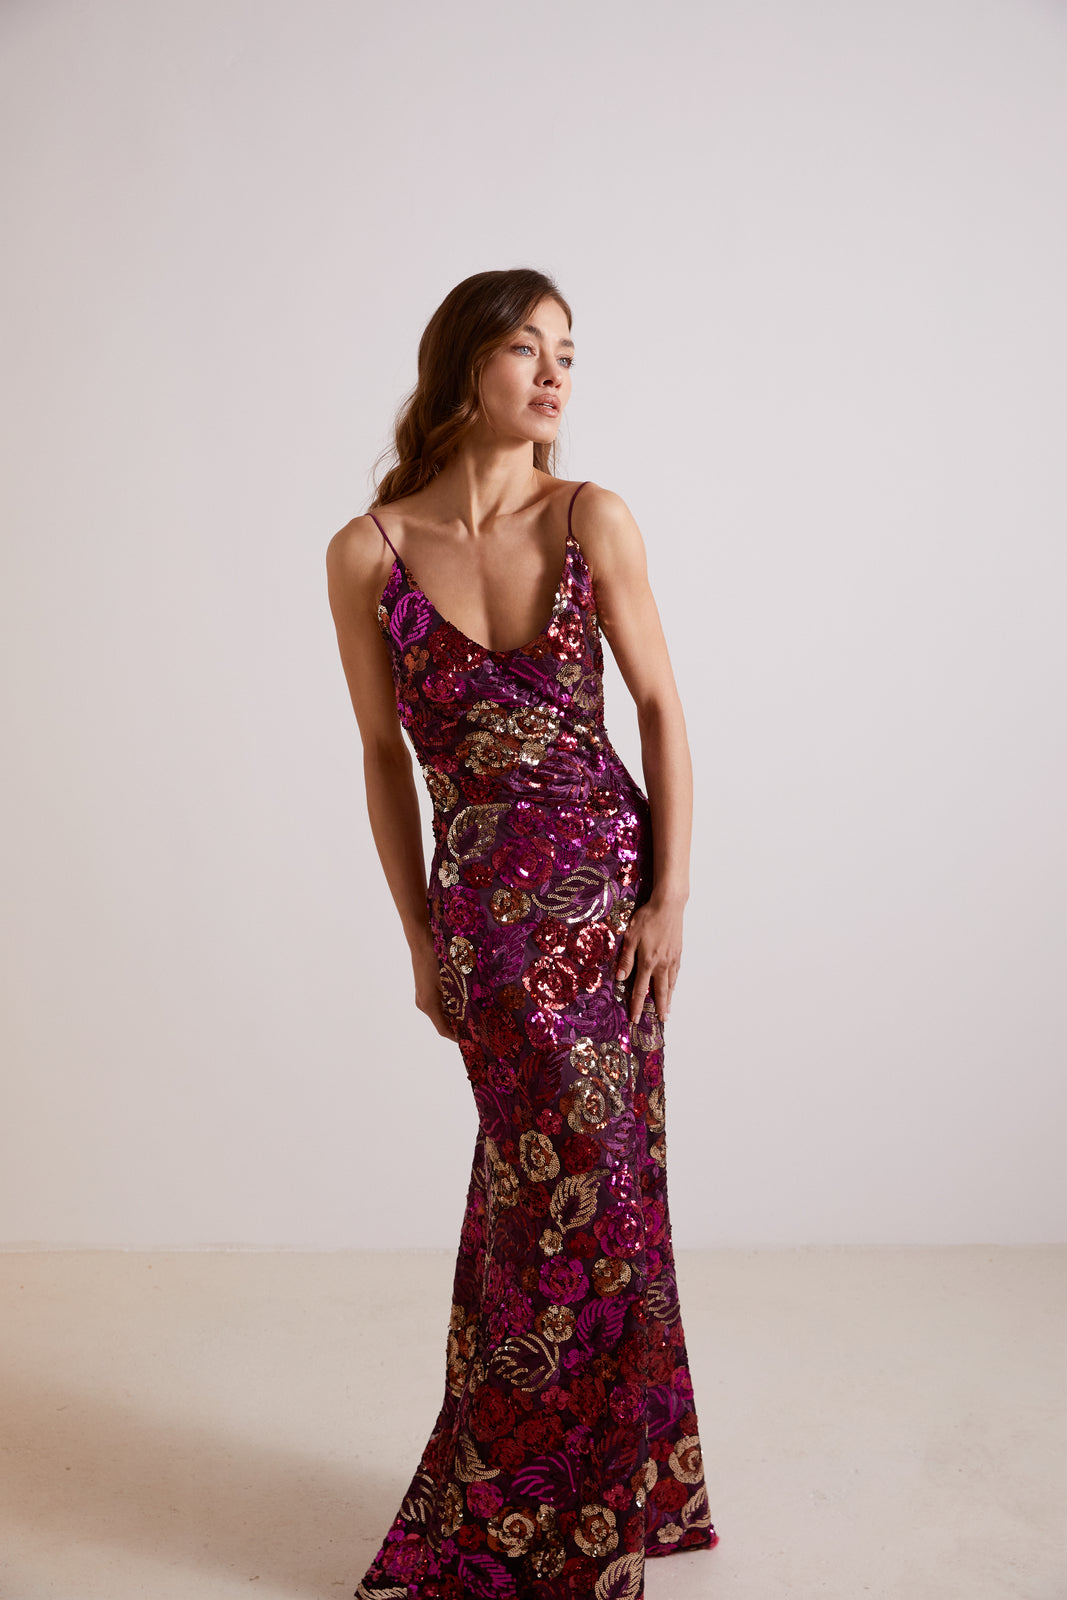 PURPLE SEQUIN DRESS WITH FLOWERS